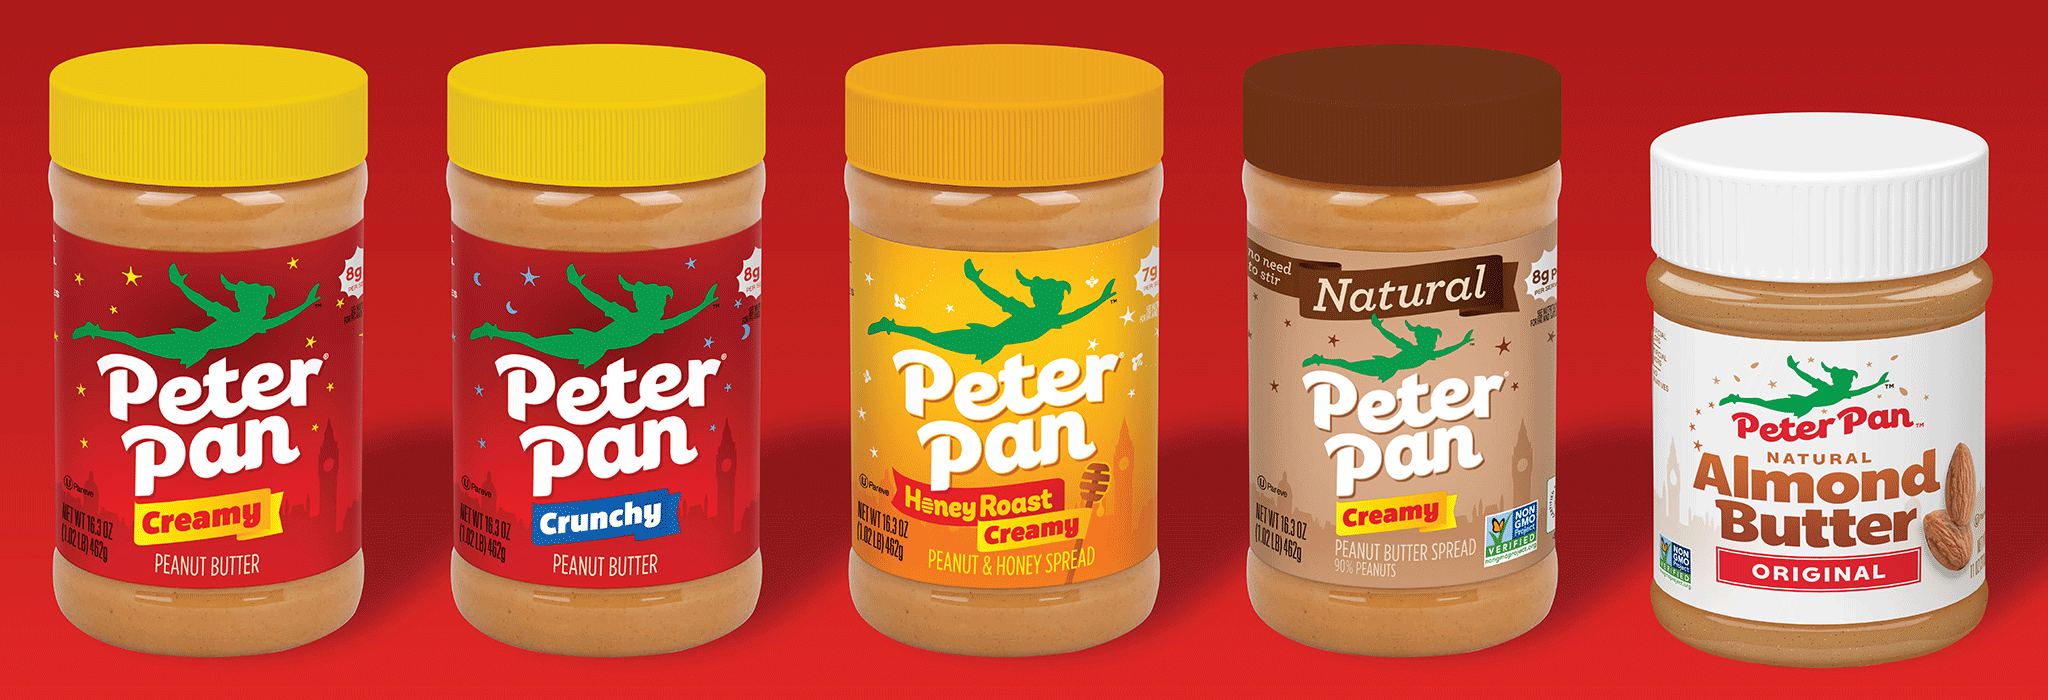 Peter Pan Peanut Butter and Almond Butter Product Packages